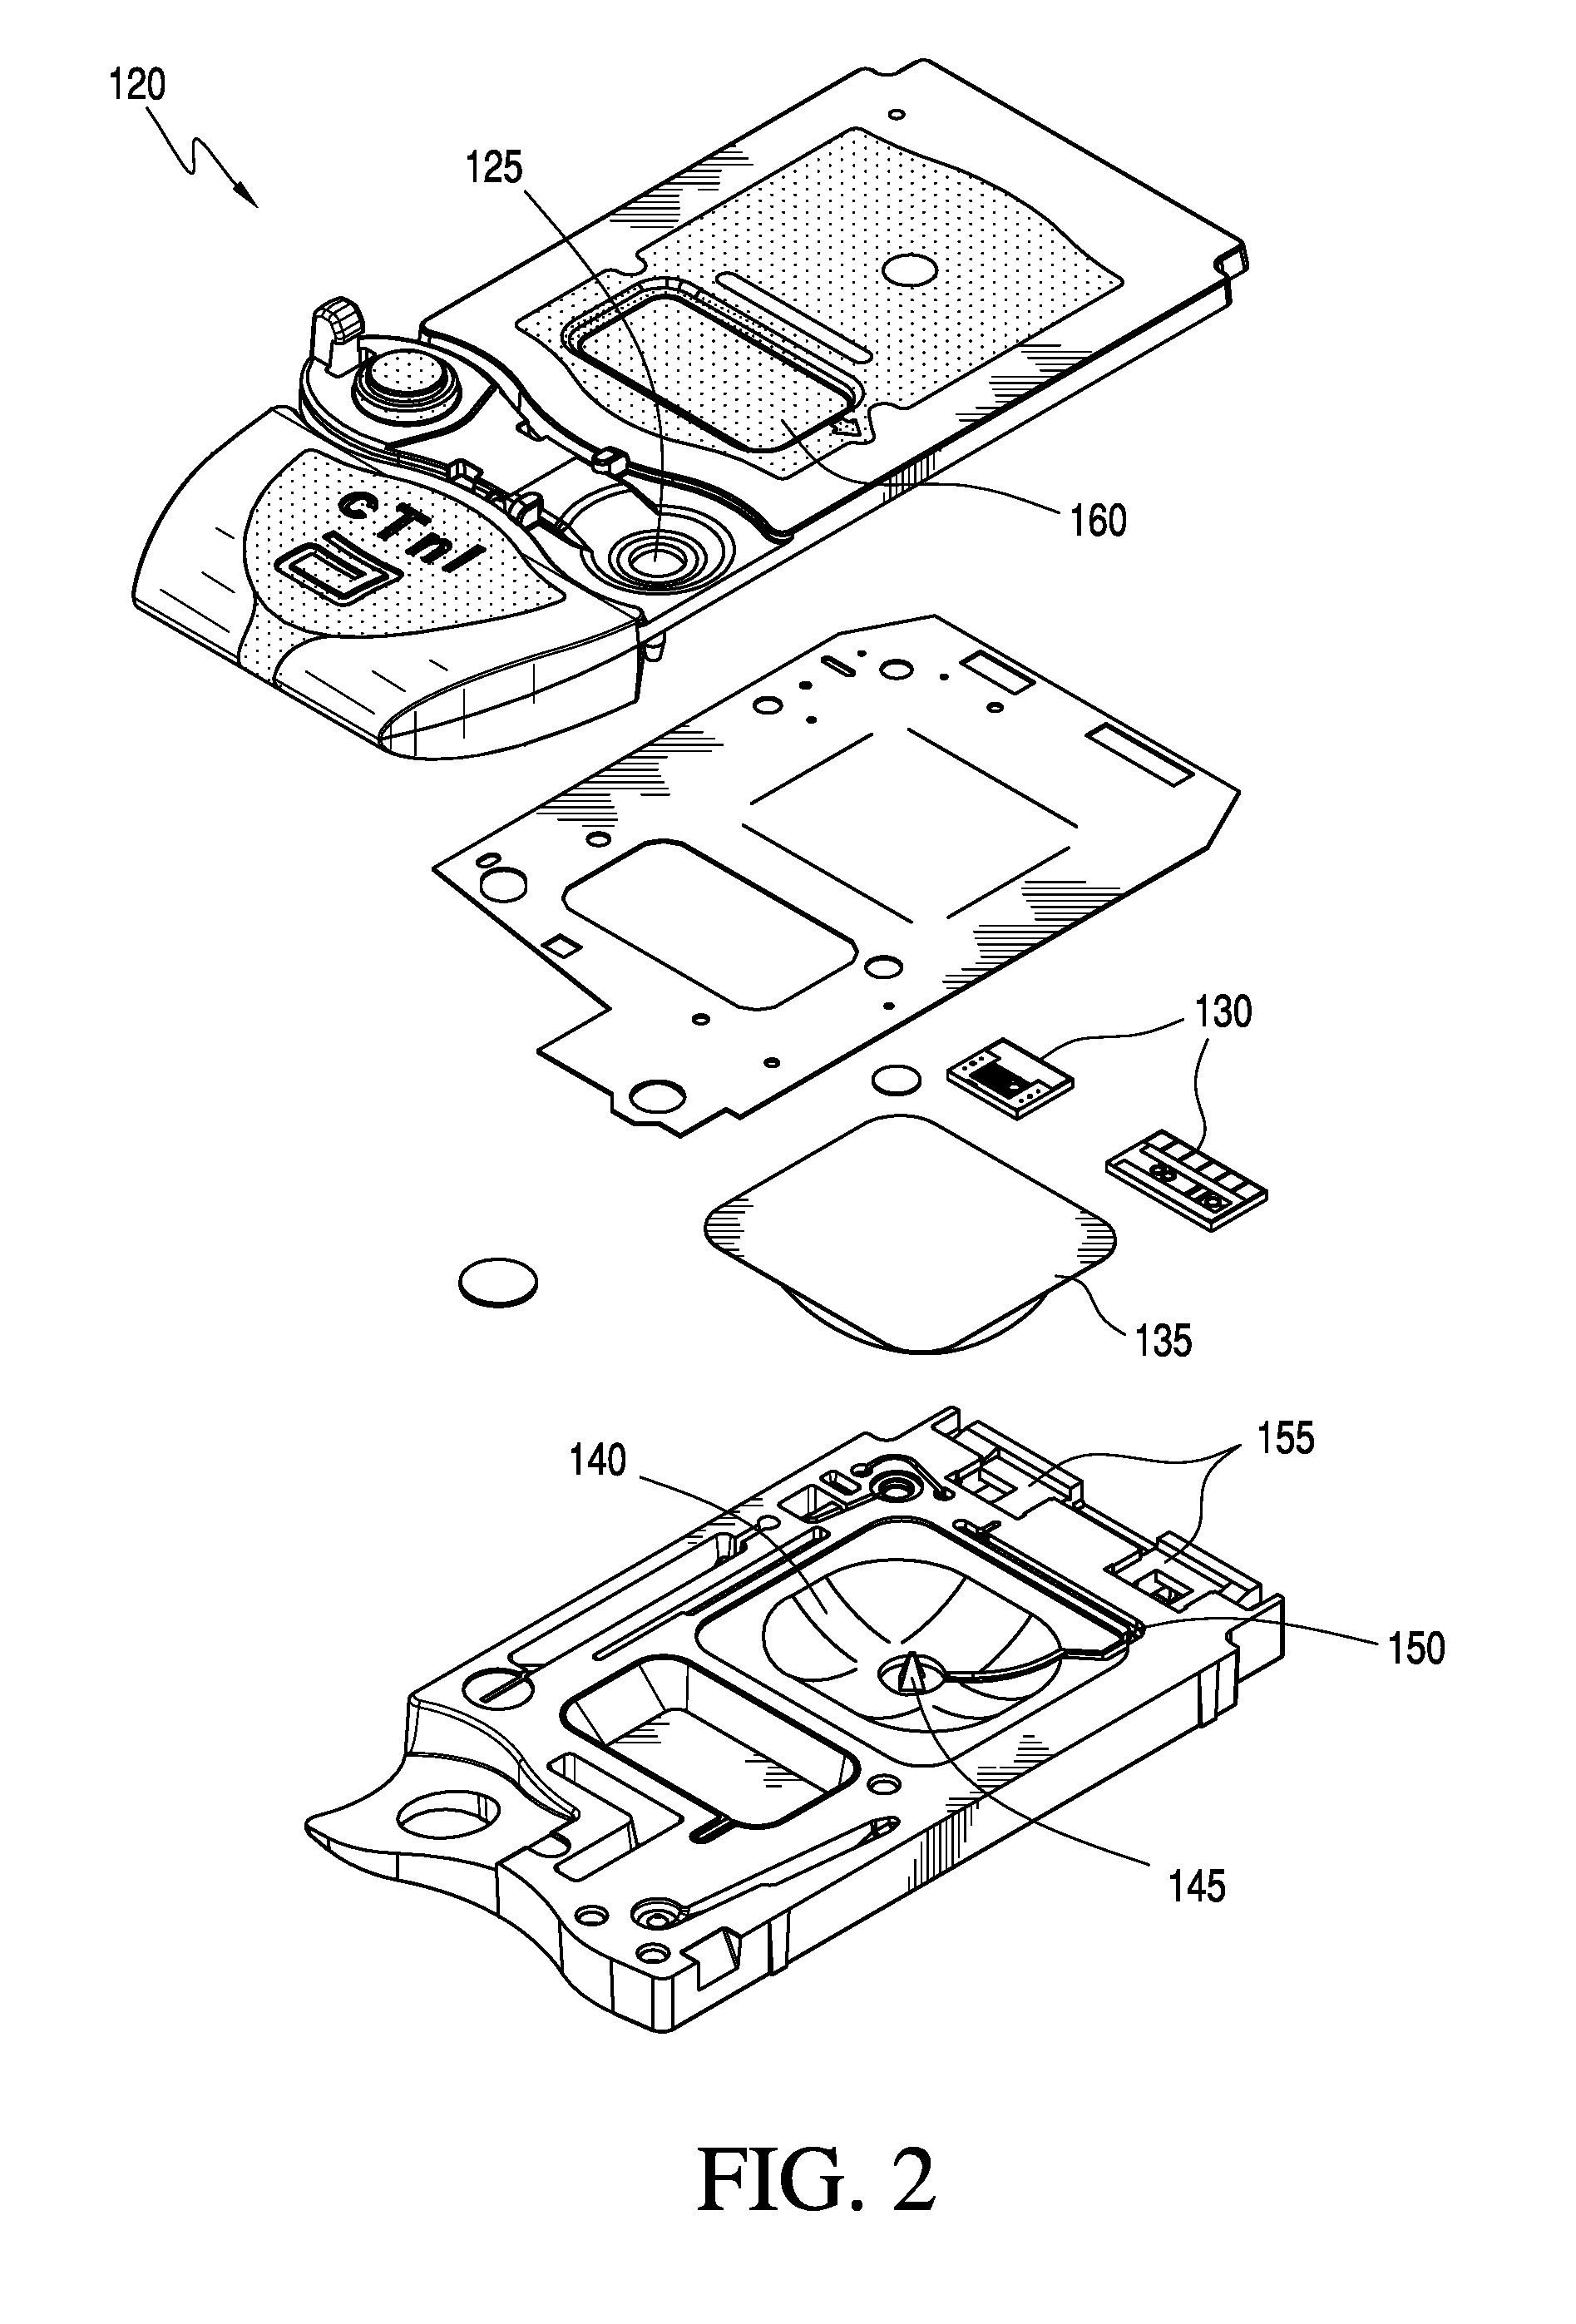 Systems and methods for assuring quality compliance of point-of-care instruments used with single-use testing devices